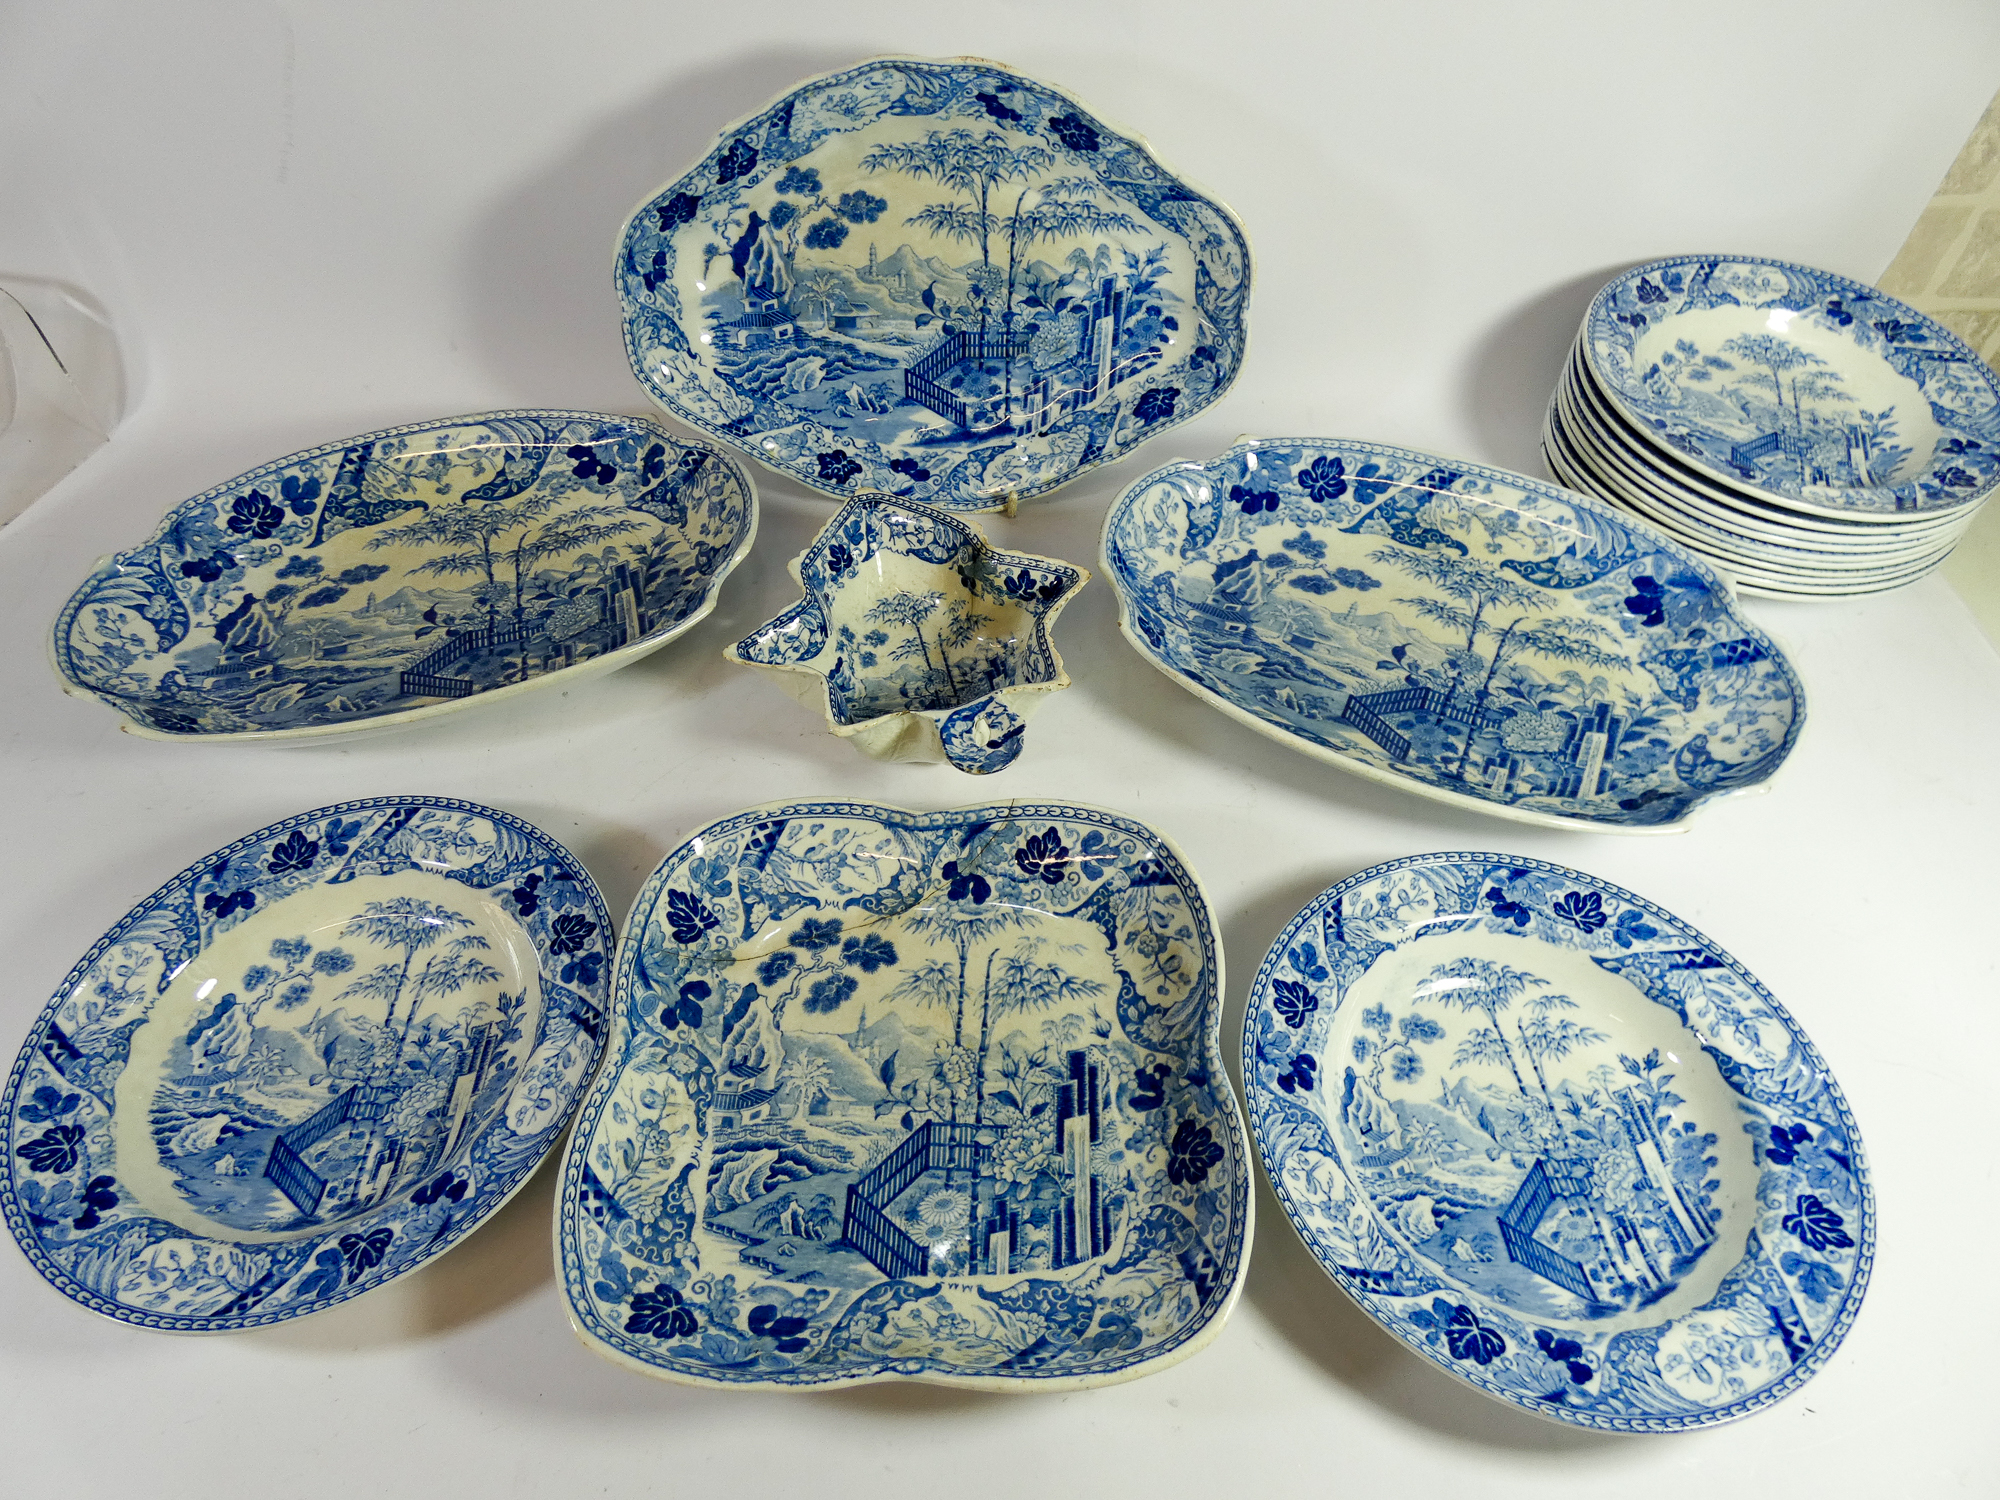 A 19th Century Wedgwood Chinese garden or bamboo and fence design blue and white part service, - Image 2 of 2